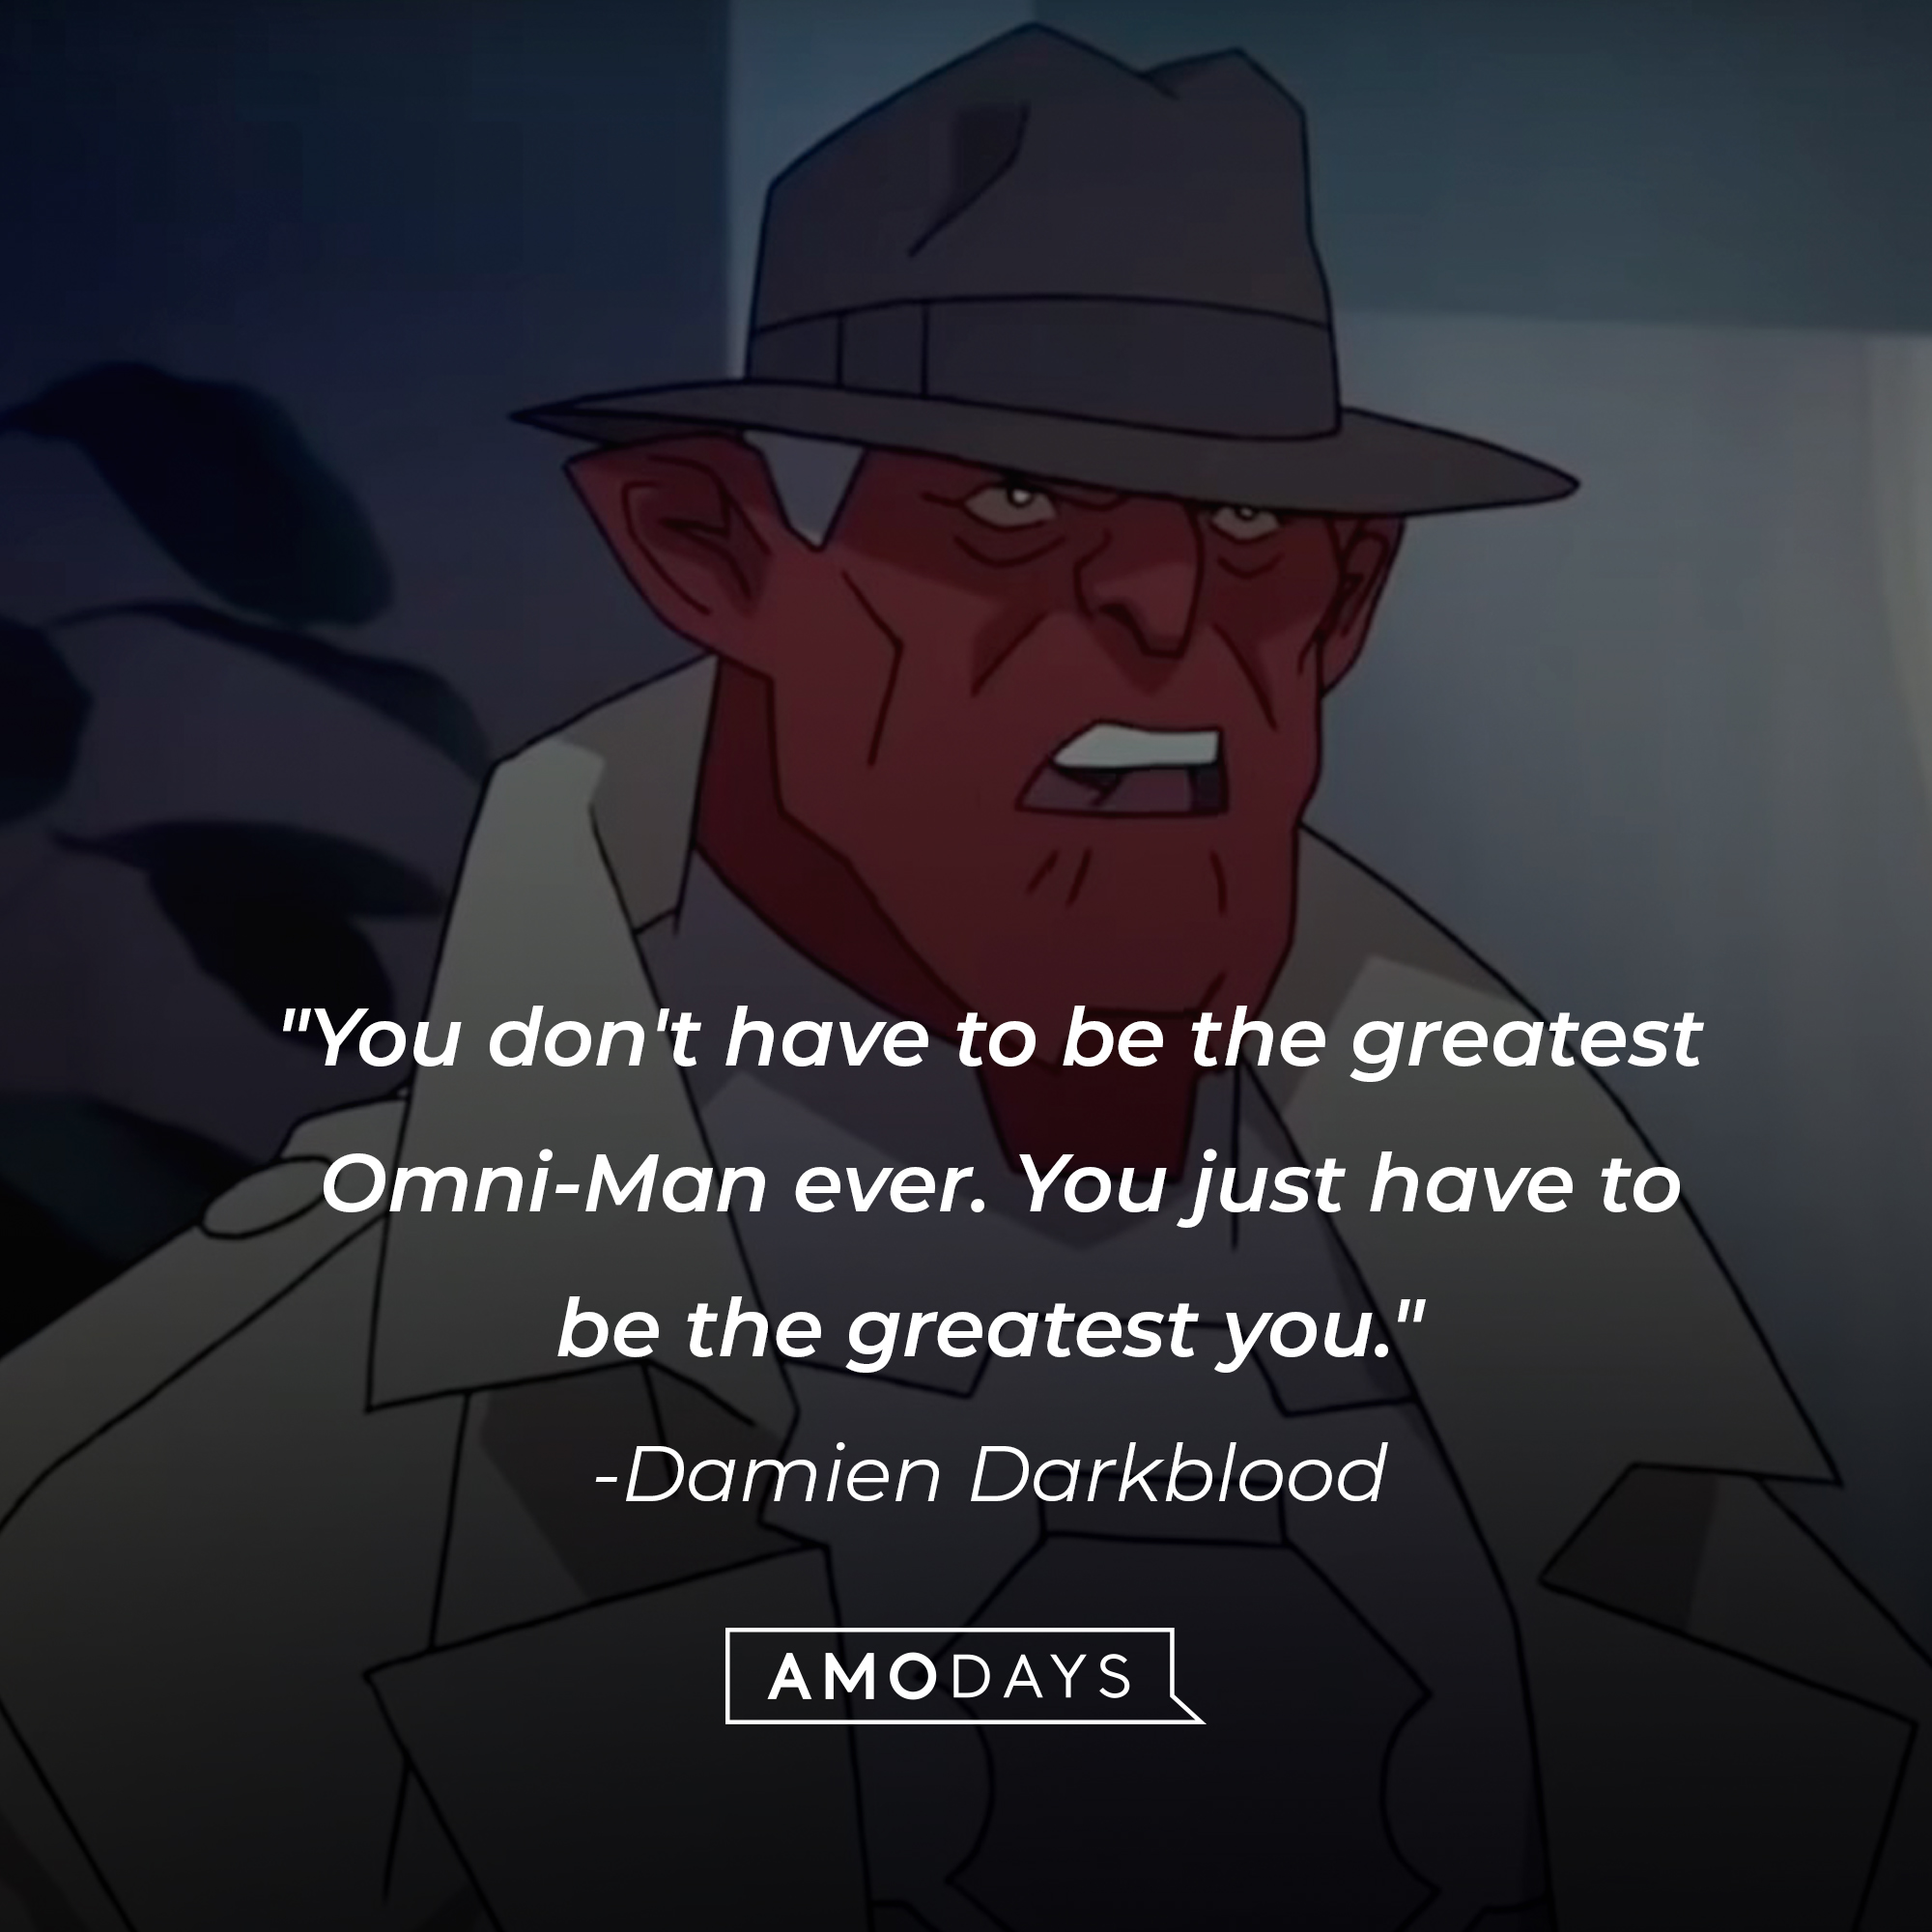 Damien Darkblood's quote: "You don't have to be the greatest Omni-Man ever. You just have to be the greatest you." | Source: Facebook.com/Invincibleuniverse